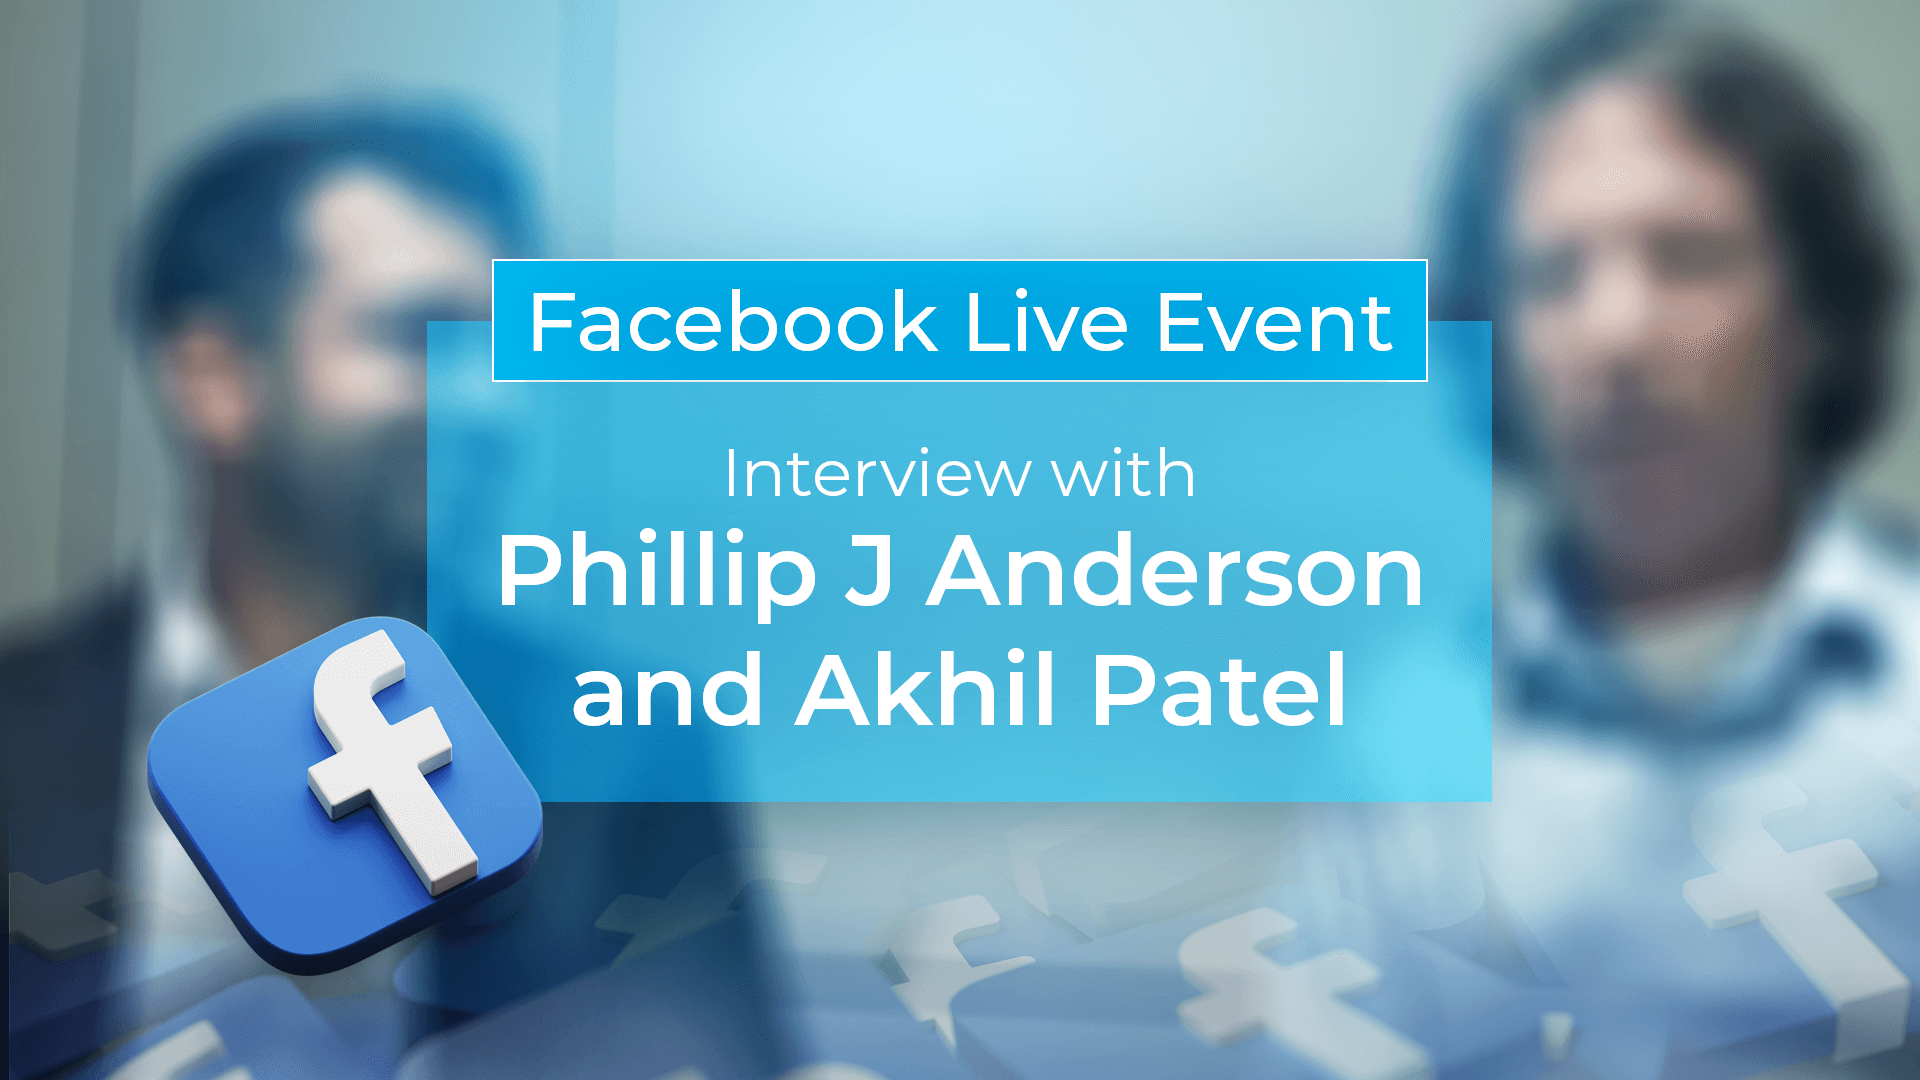 FB Live Event with Phillip J Anderson and Akhil Patel